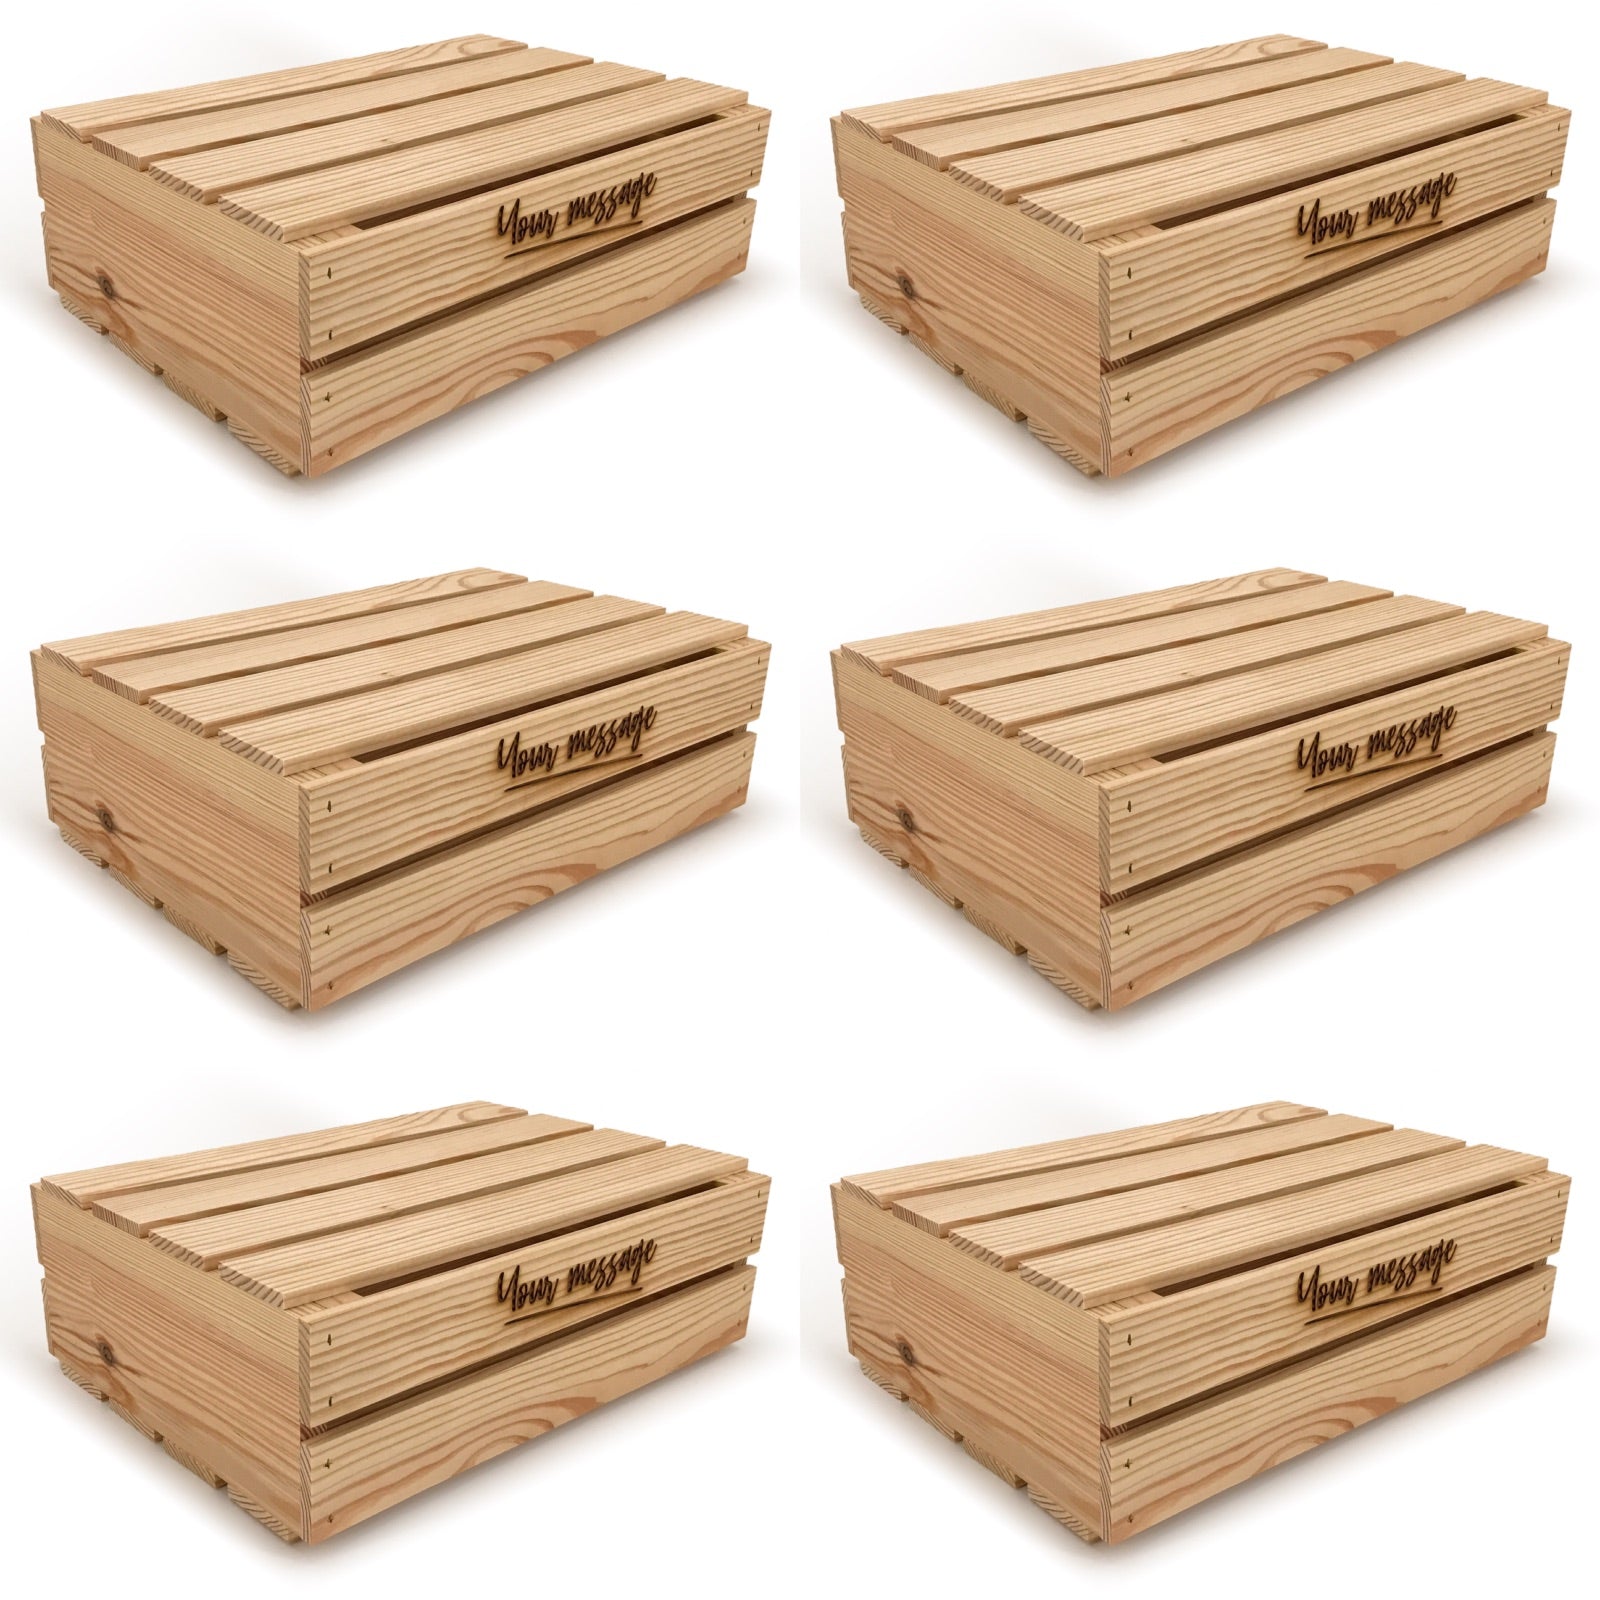 6 Small wooden crates with lid and custom message 16x12x5.25, 6-WS-16-12-5.25-ST-NW-LL, 12-WS-16-12-5.25-ST-NW-LL, 24-WS-16-12-5.25-ST-NW-LL, 48-WS-16-12-5.25-ST-NW-LL, 96-WS-16-12-5.25-ST-NW-LL